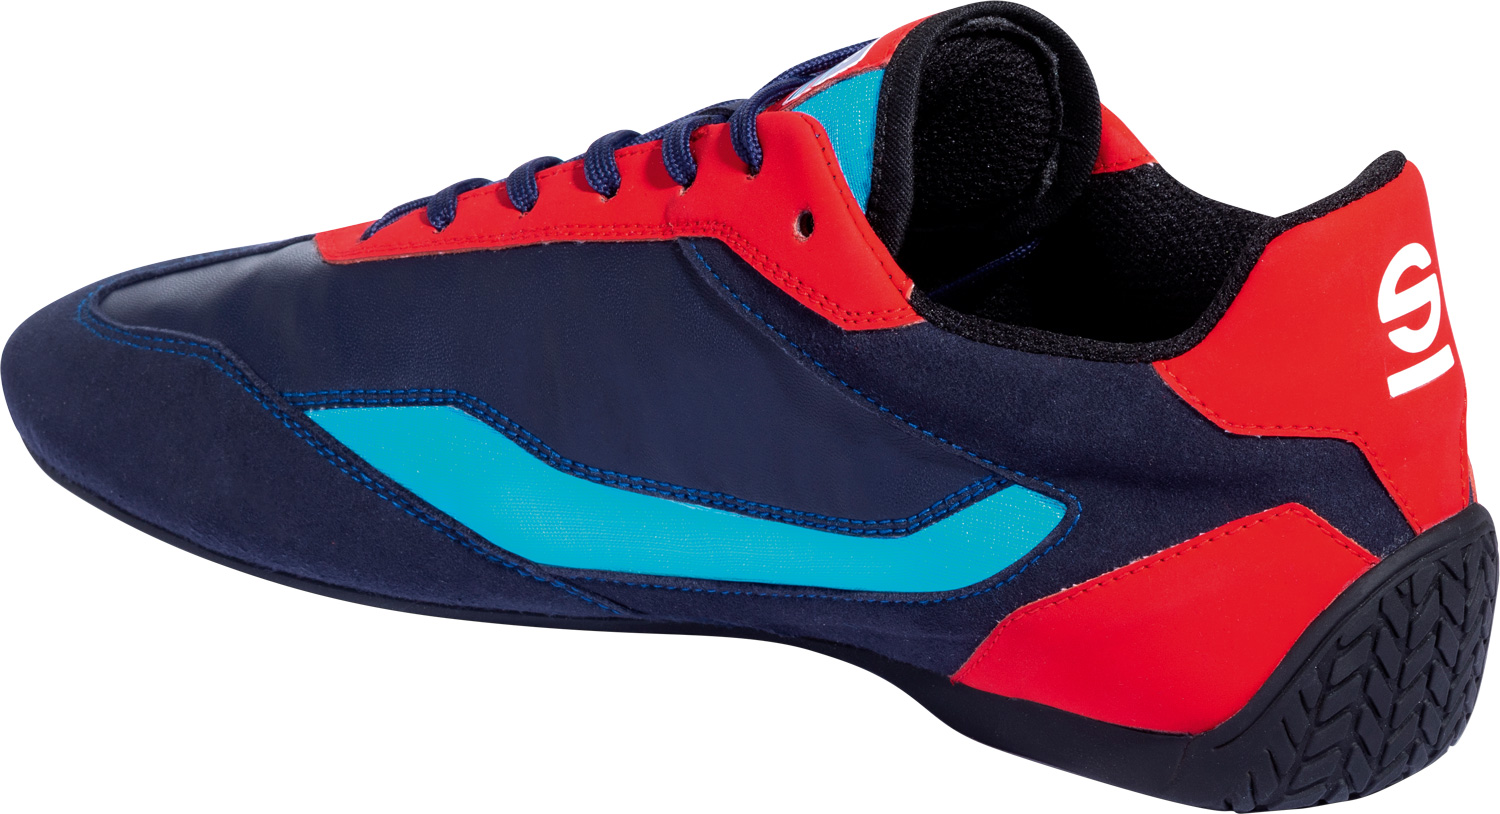 SPARCO S-DRIVE MARTINI RACING SHOES